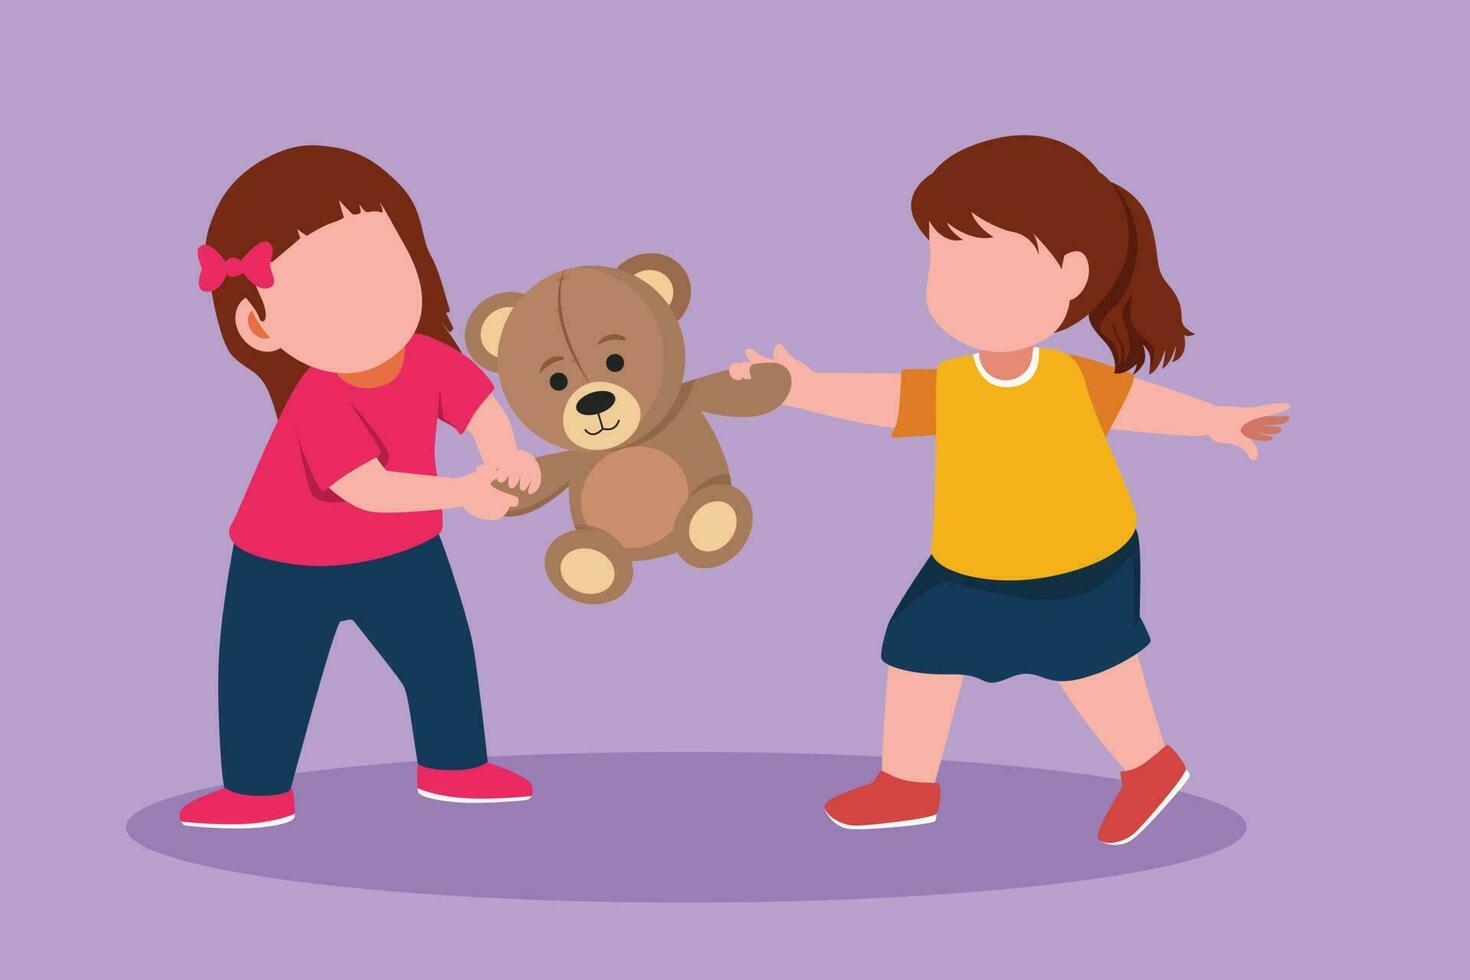 Character flat drawing two little girls fighting over a princess doll. Conflict between children at kindergarten. Kids sibling fighting in playroom because of toy. Cartoon design vector illustration